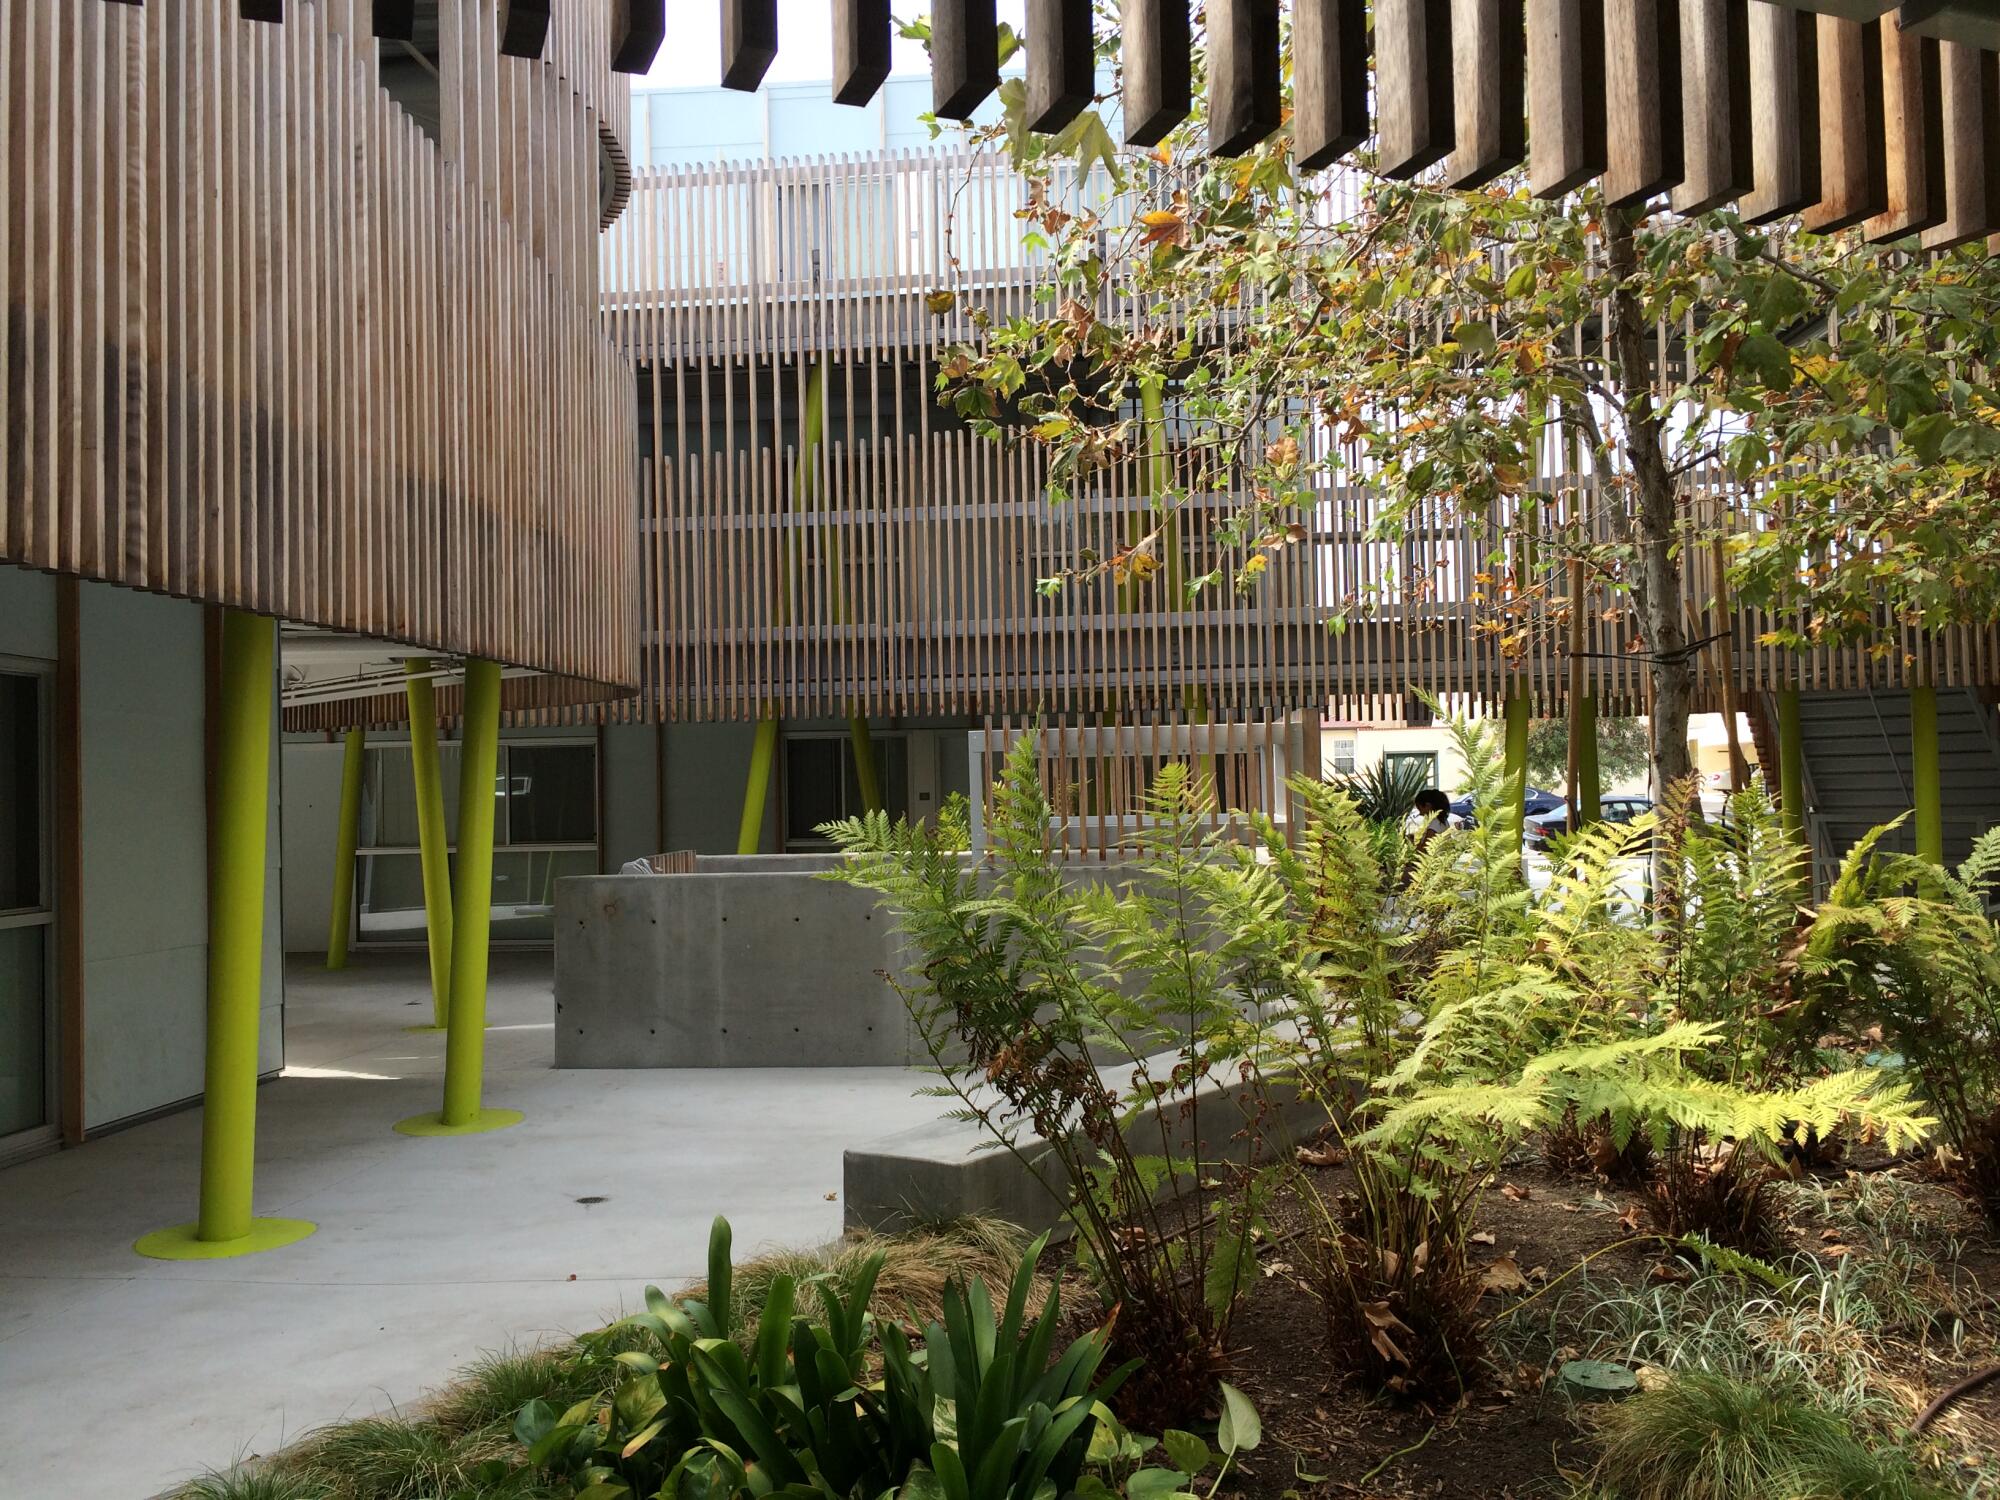 Trees and ferns are seen in the courtyard of a two-story building whose balconies are lined with wood-slat balustrades.